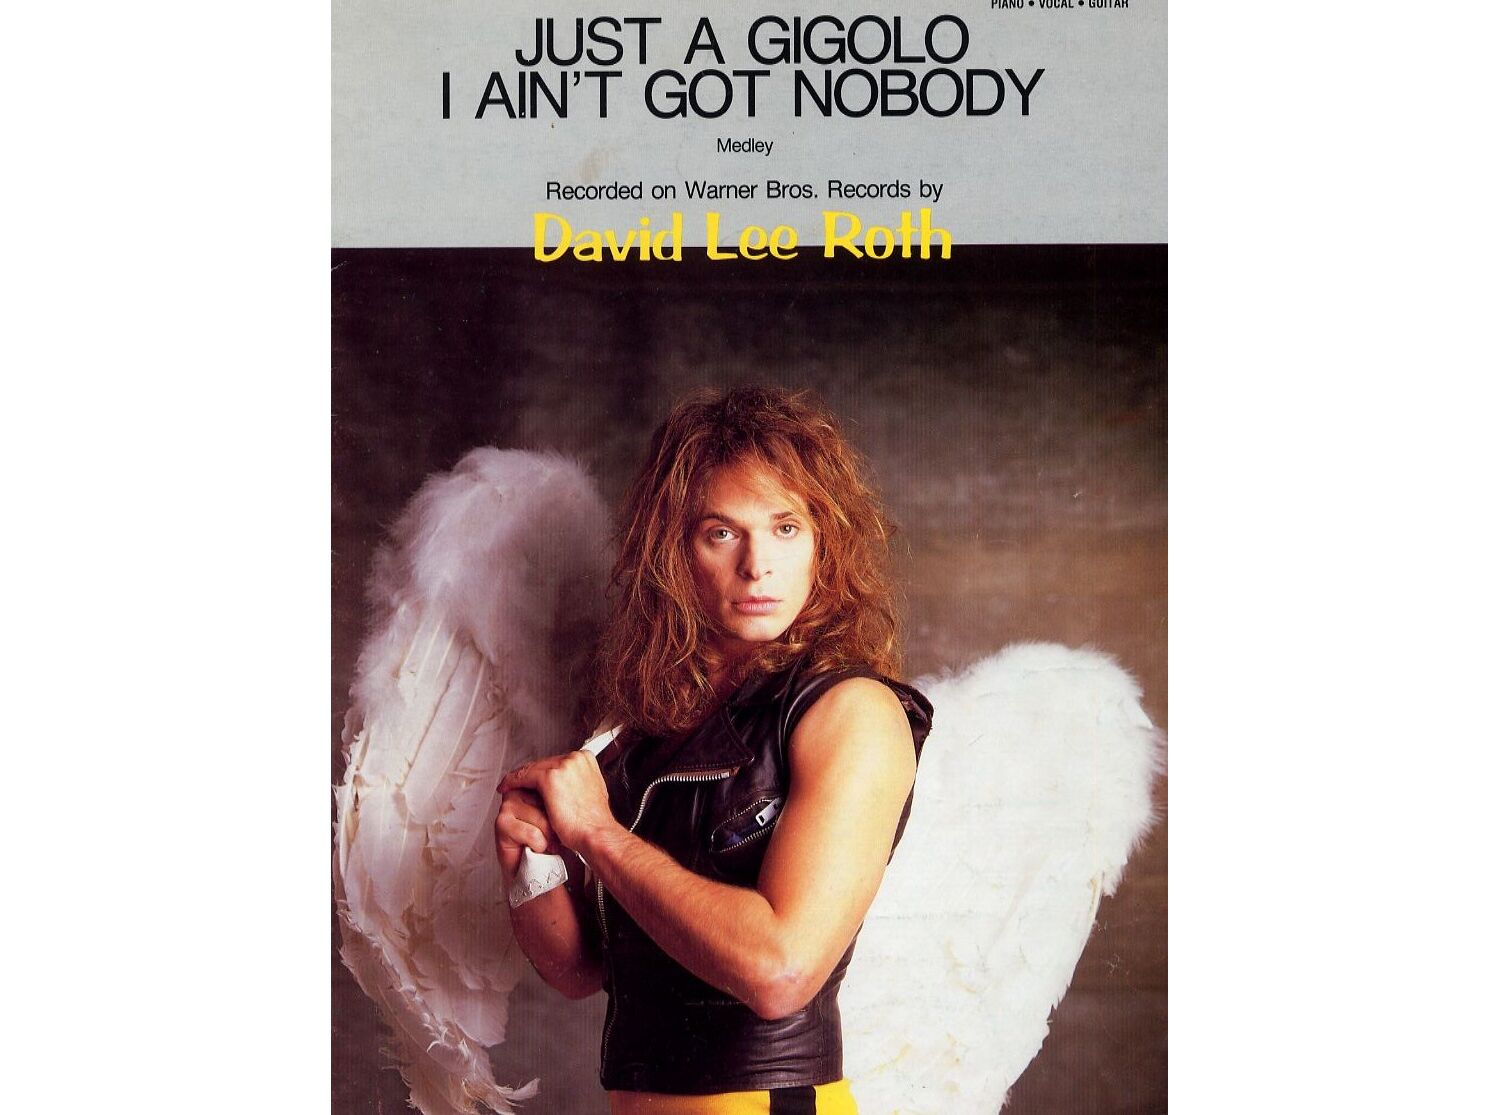 Just a Gigolo and I ain't got Nobody - Featuring David Lee Roth - Piano -  Vocal - Guitar only £